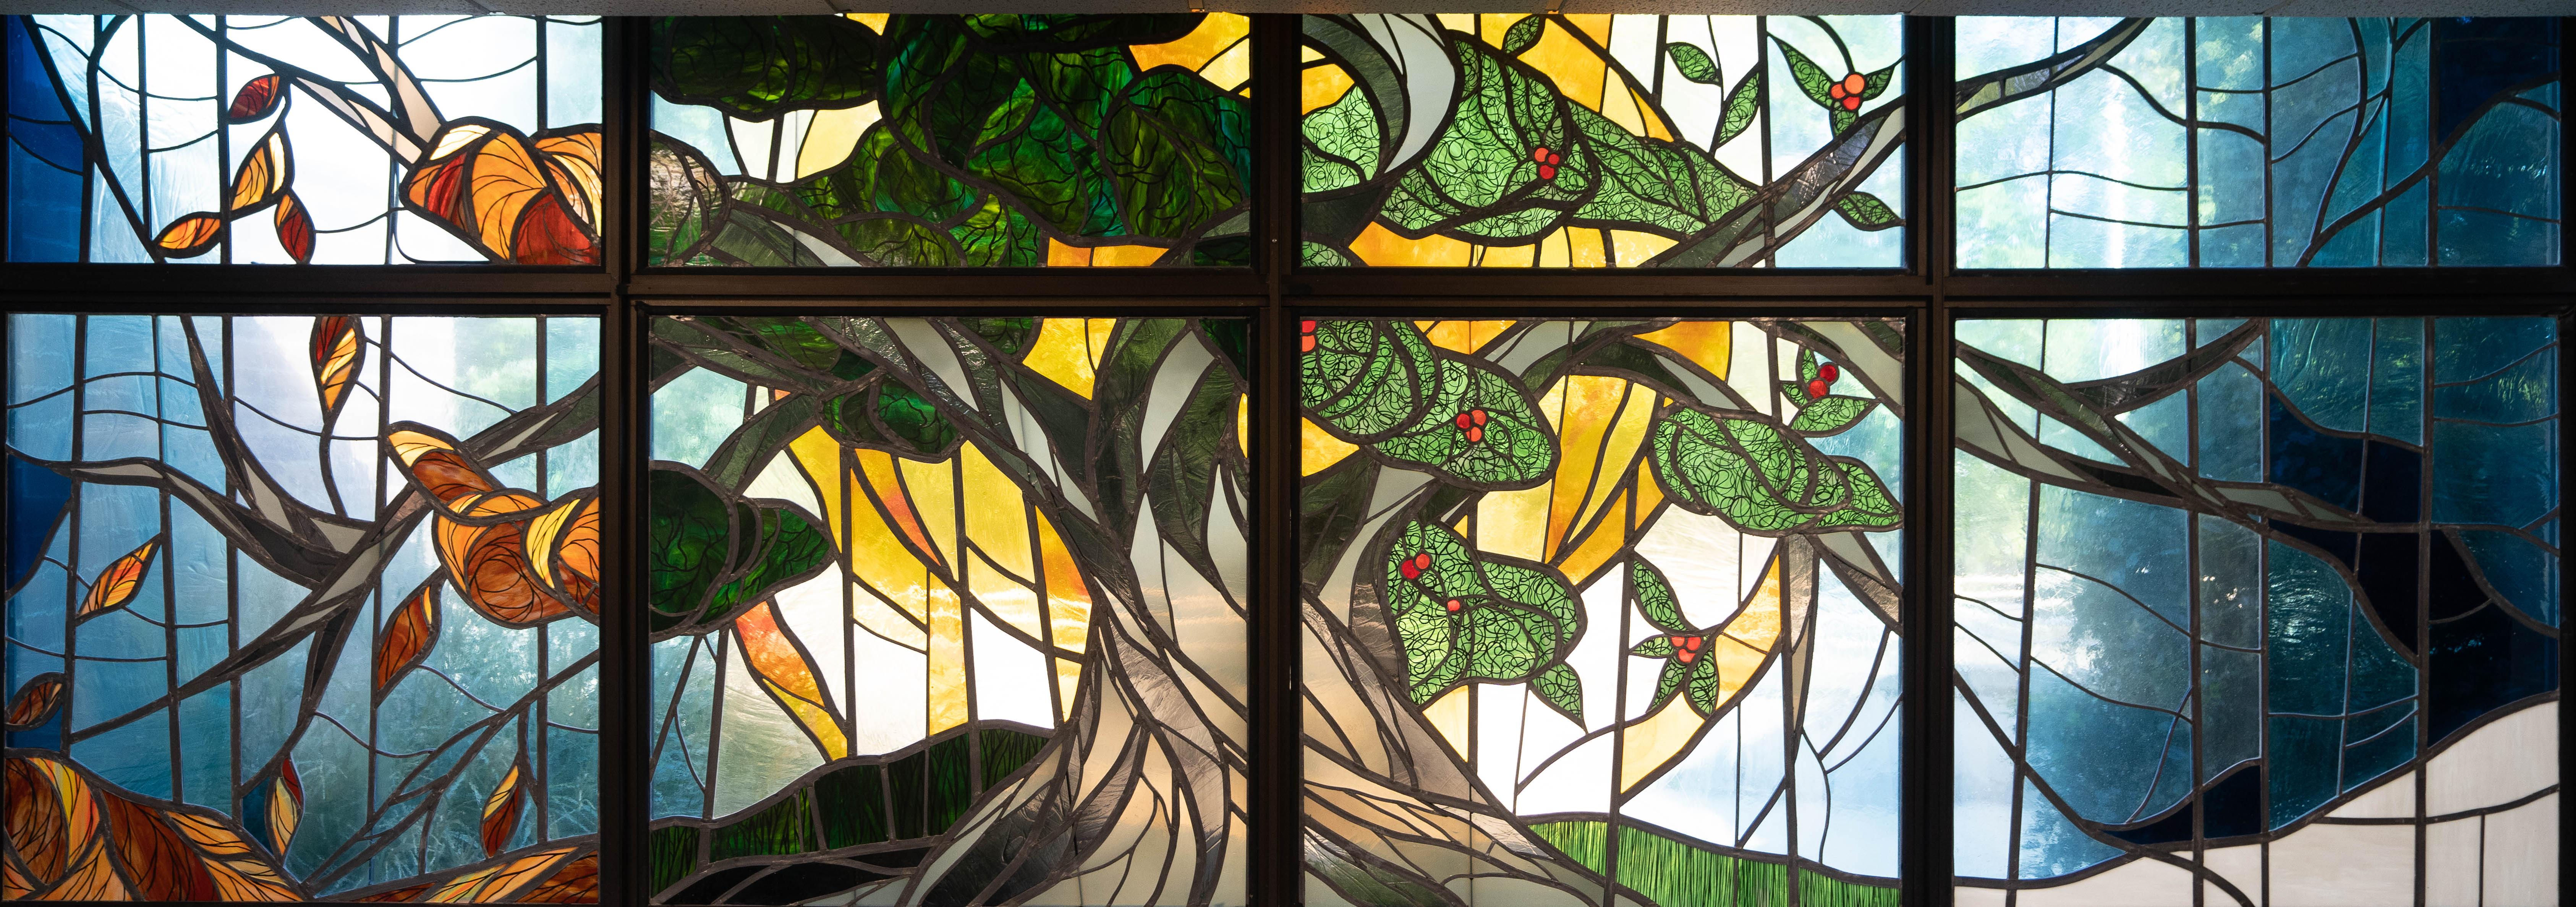 Stained glass at NE Philadelphia campus